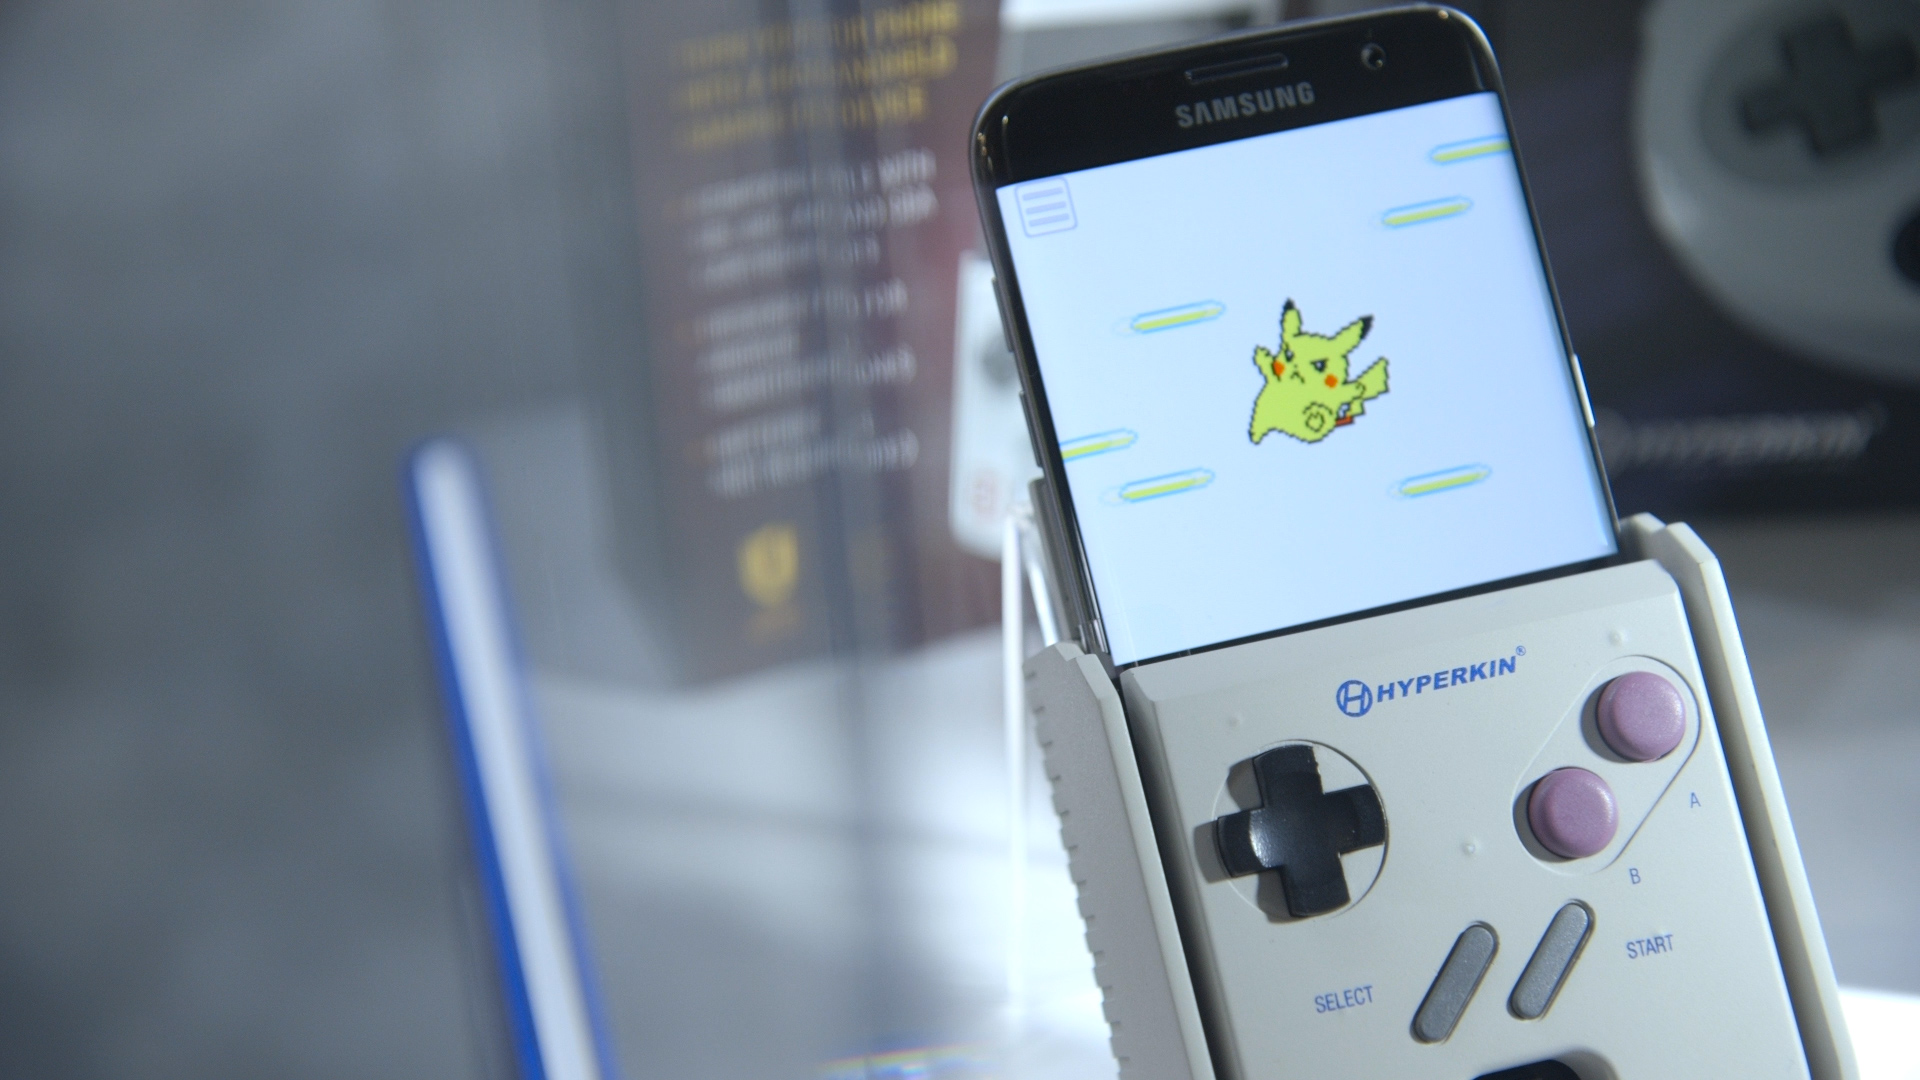 I want to own this tiny Game Boy that fits on a keychain - The Verge